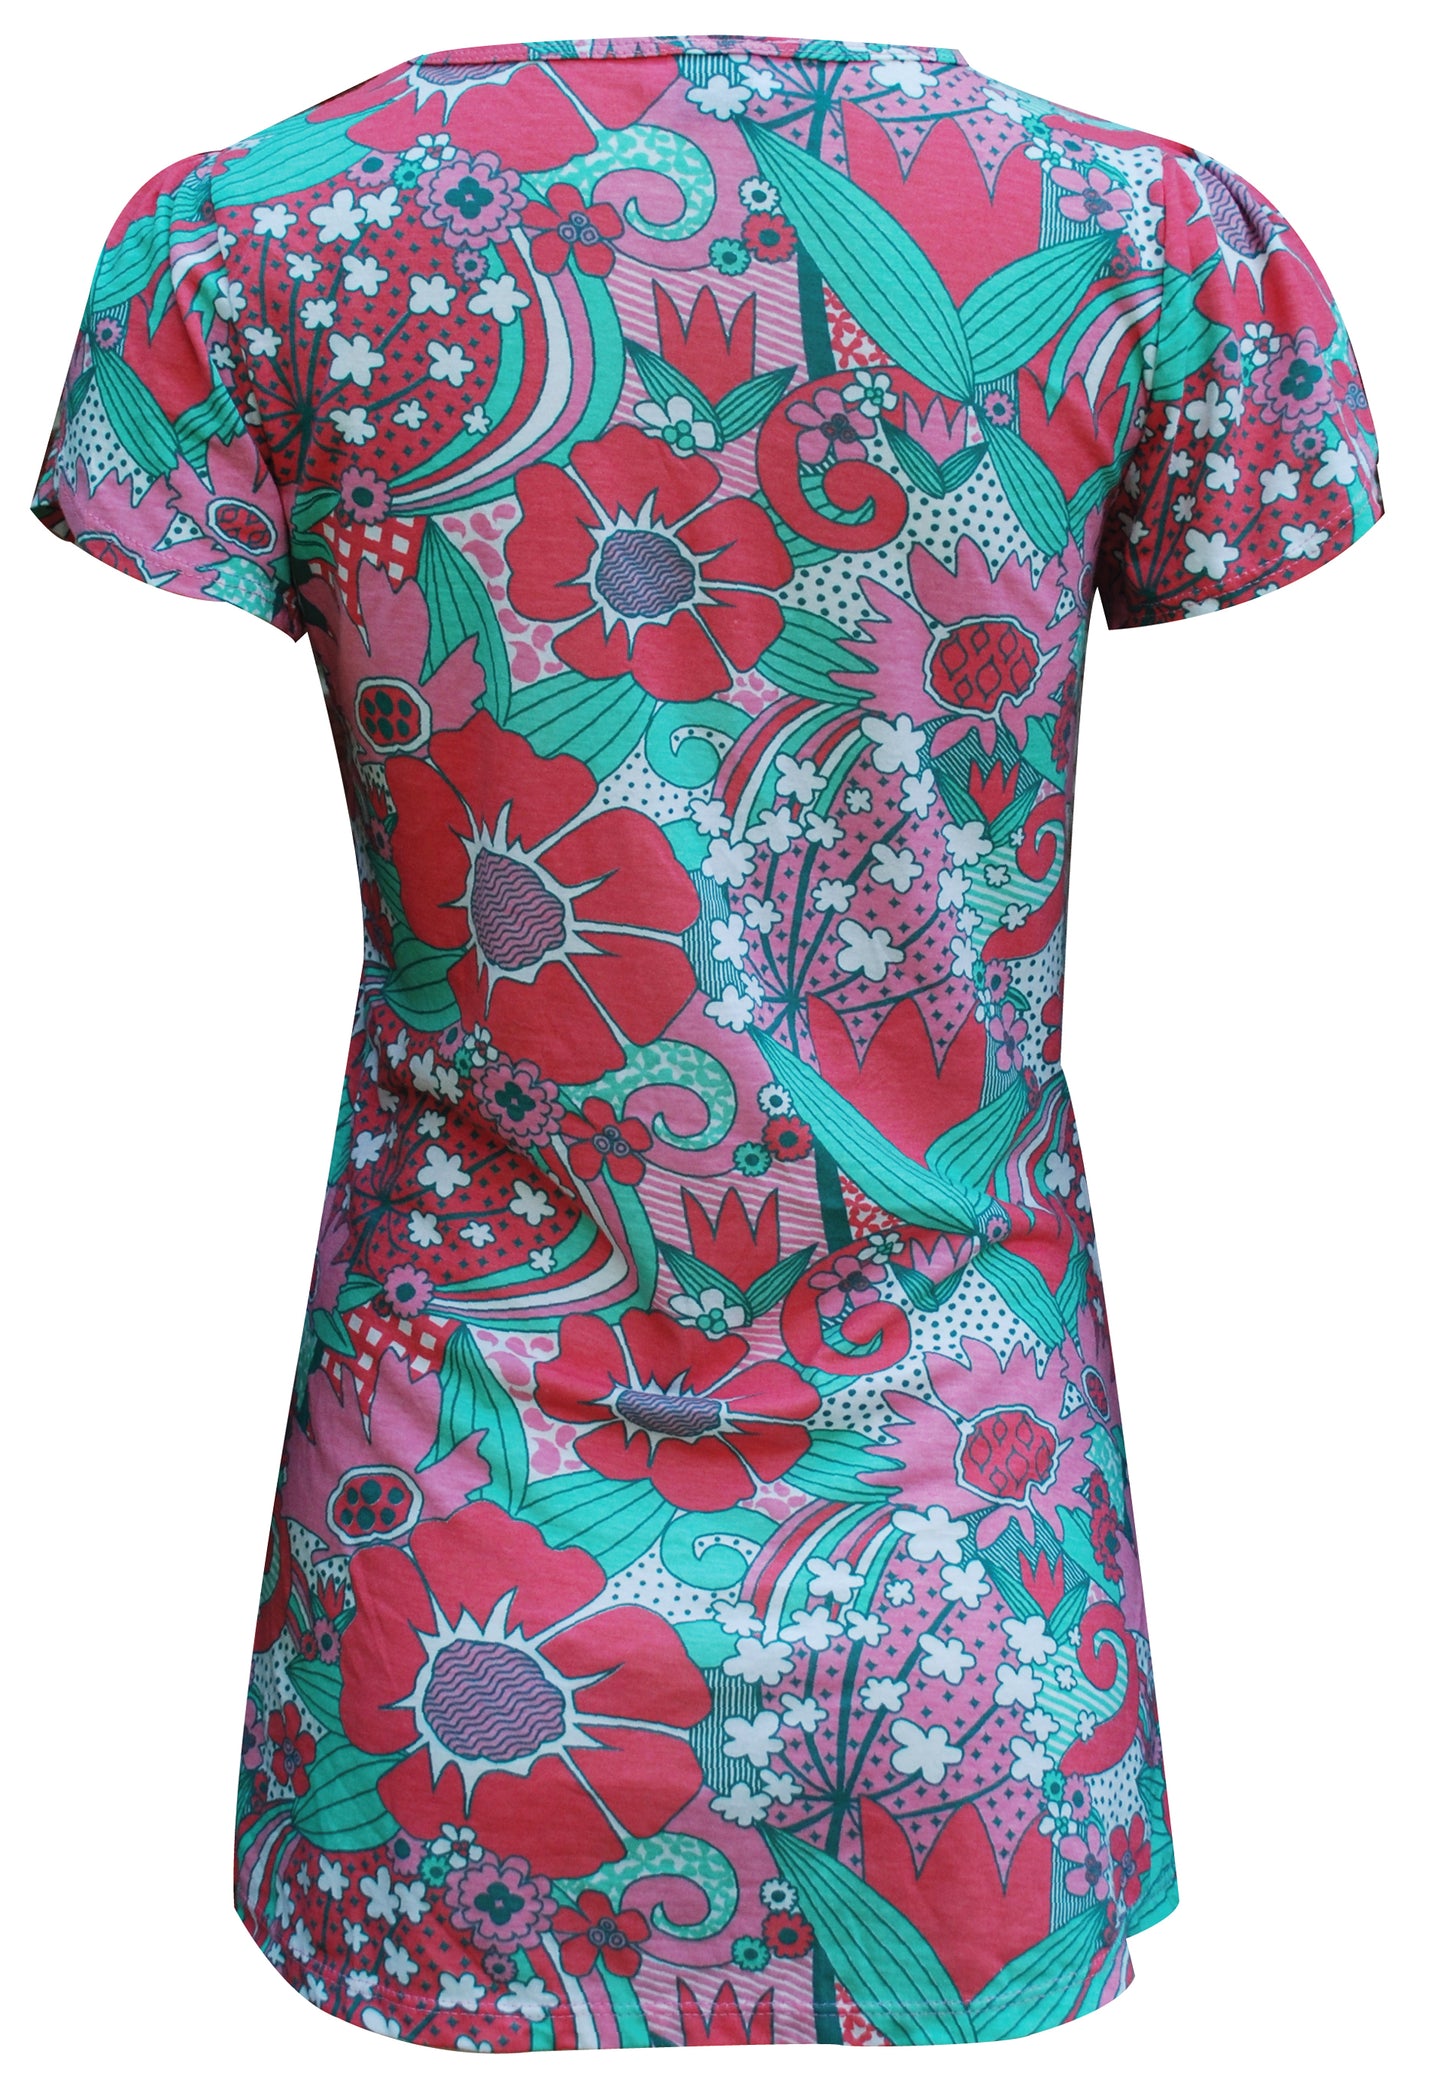 Back view of tulip-sleeved pink and green floral tee